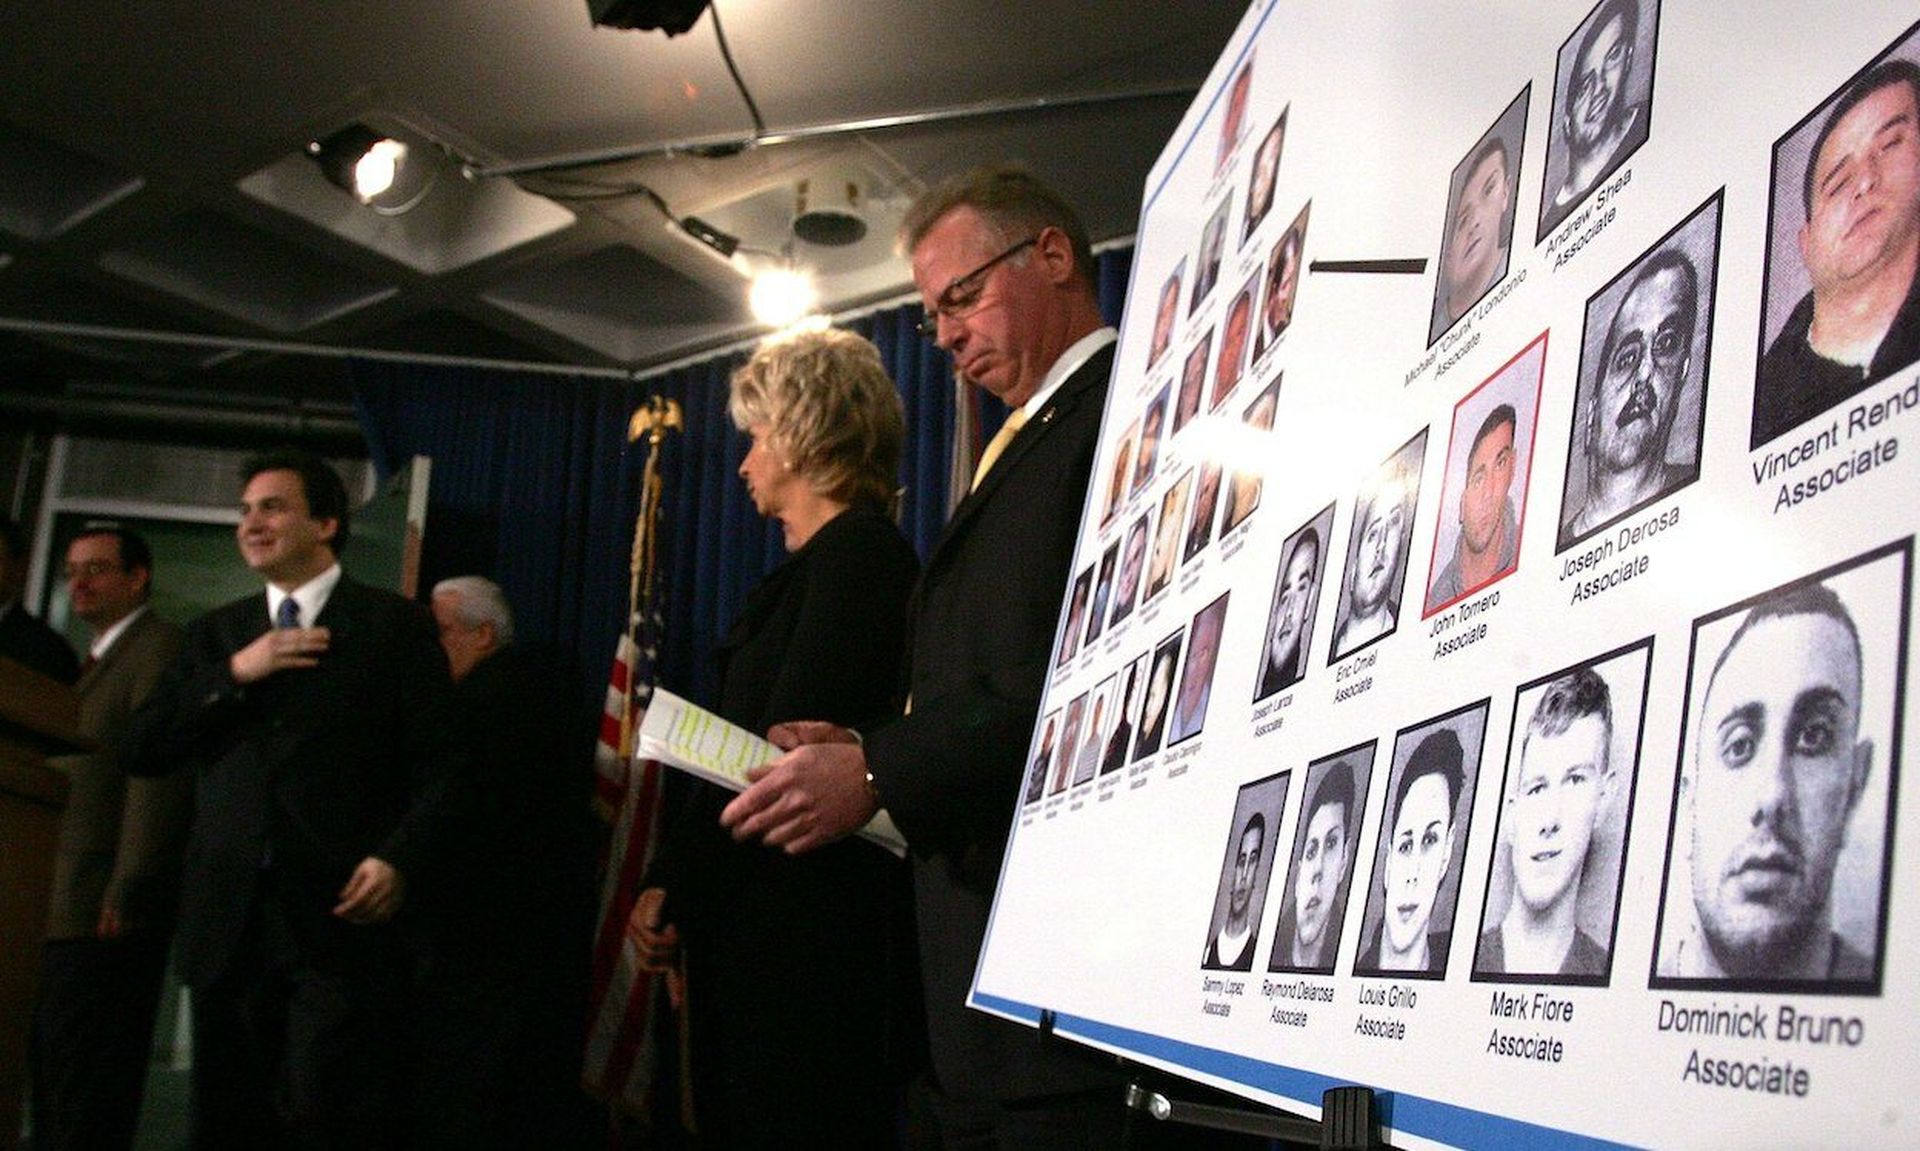 U.S. Attorney for the Southern District of New York Michael Garcia (left) announces the indictments of over 30 members of the Genovese organized crime family at a New York City news conference in 2006. Today’s columnist, Tom Hickman of ThreatX, says when it’s working well, API security is similar to an organized crime investigation where all commun...